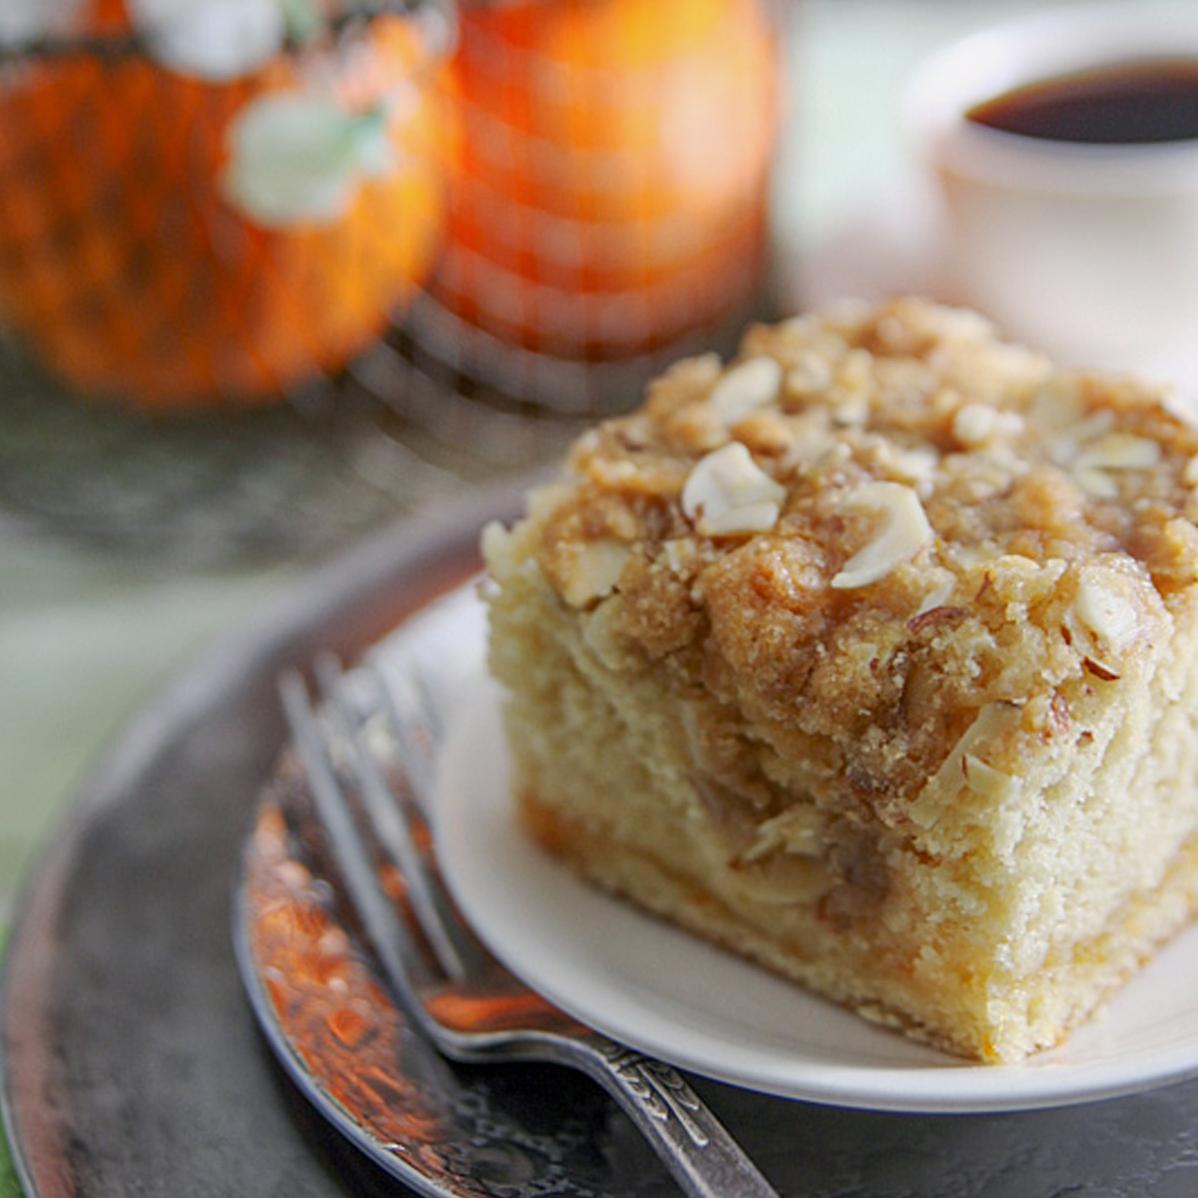 Indulge in This Decadent Coffee Cake Recipe Today!